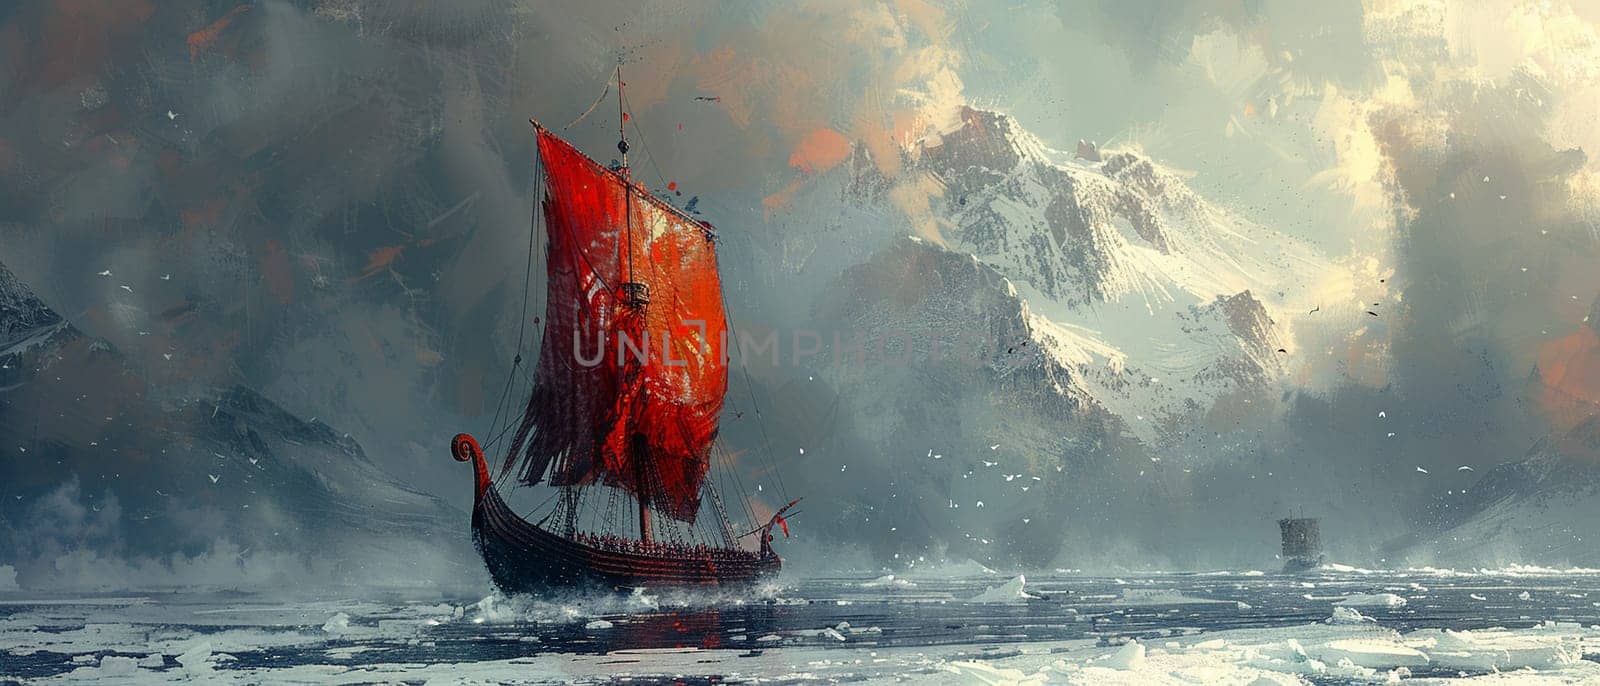 Viking longship navigating icy waters, depicted with a Norse art style and cold, bracing colors.